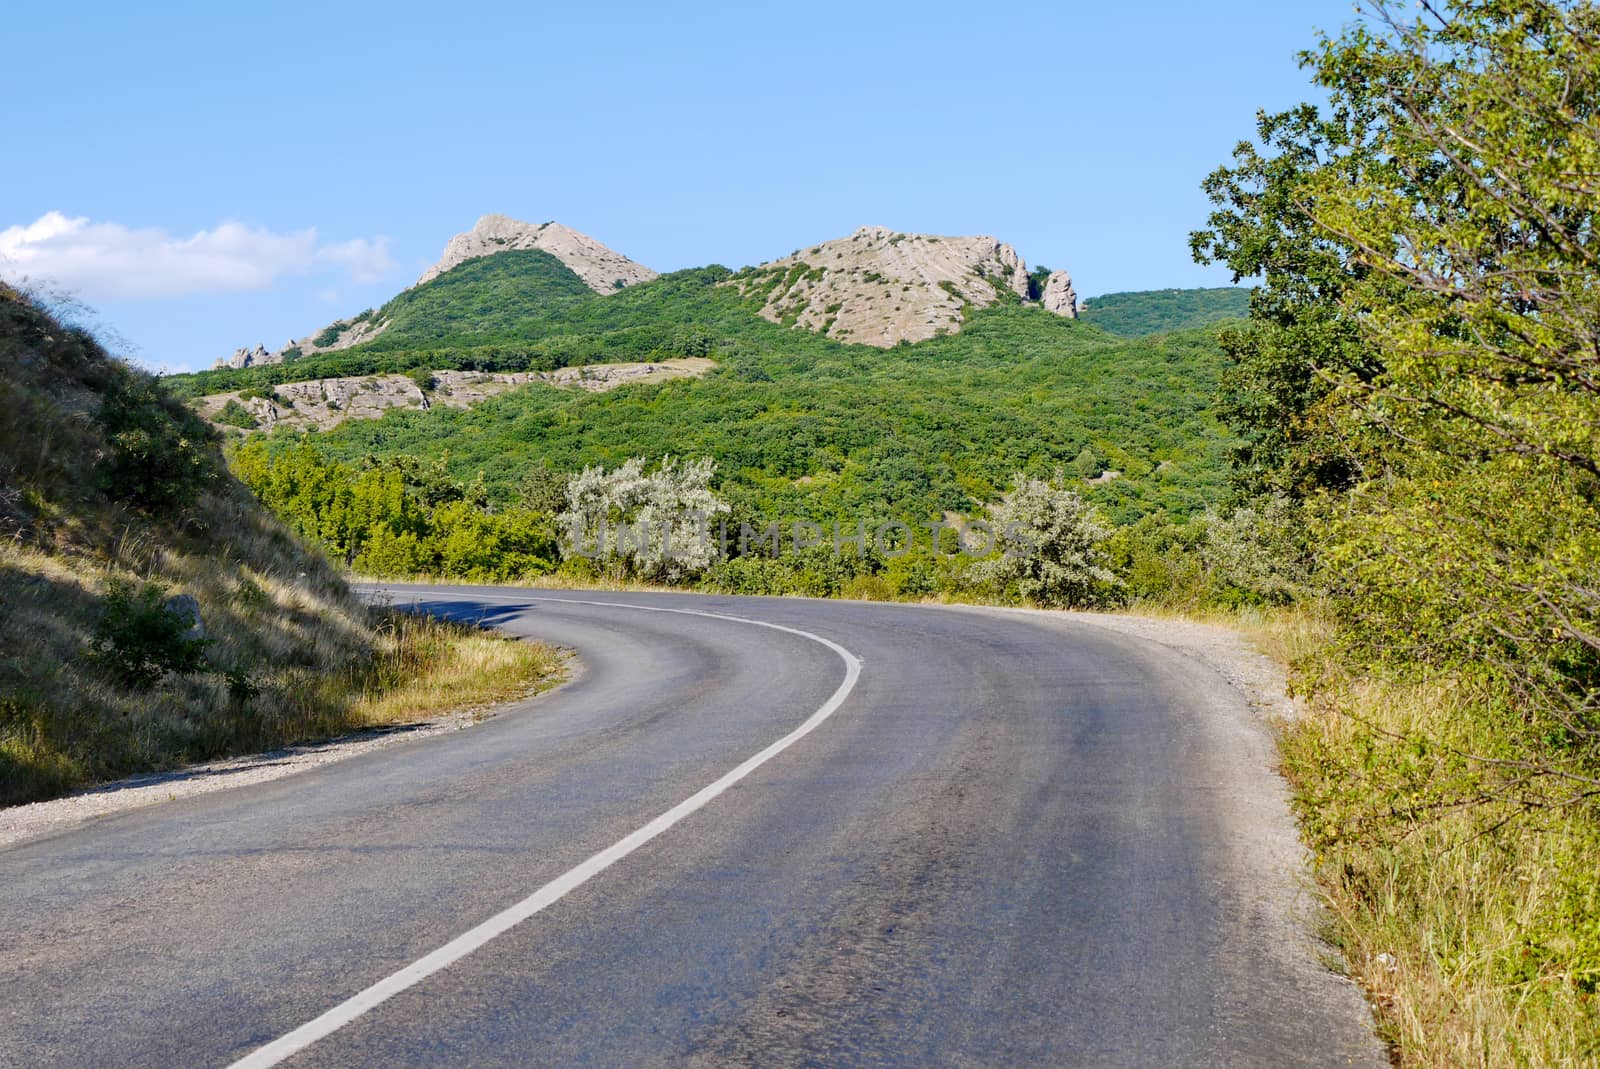 the road is rolled up against the background of high cliffs covered with grass under the blue sky by Adamchuk